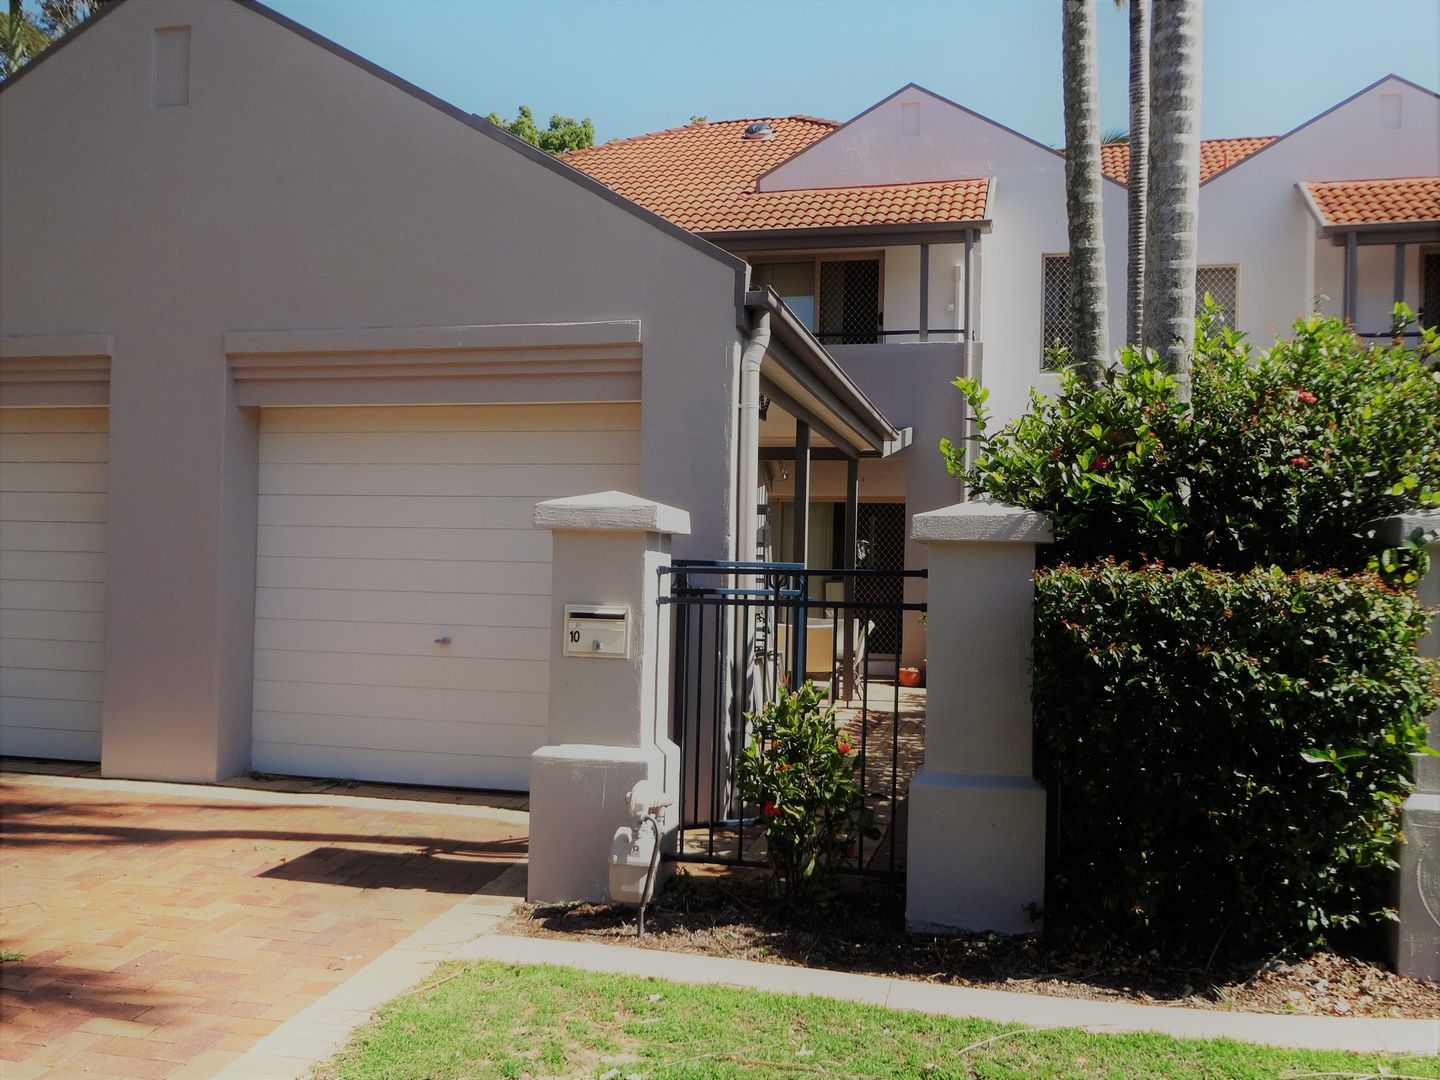 11/101 Coutts Street, Bulimba QLD 4171, Image 1